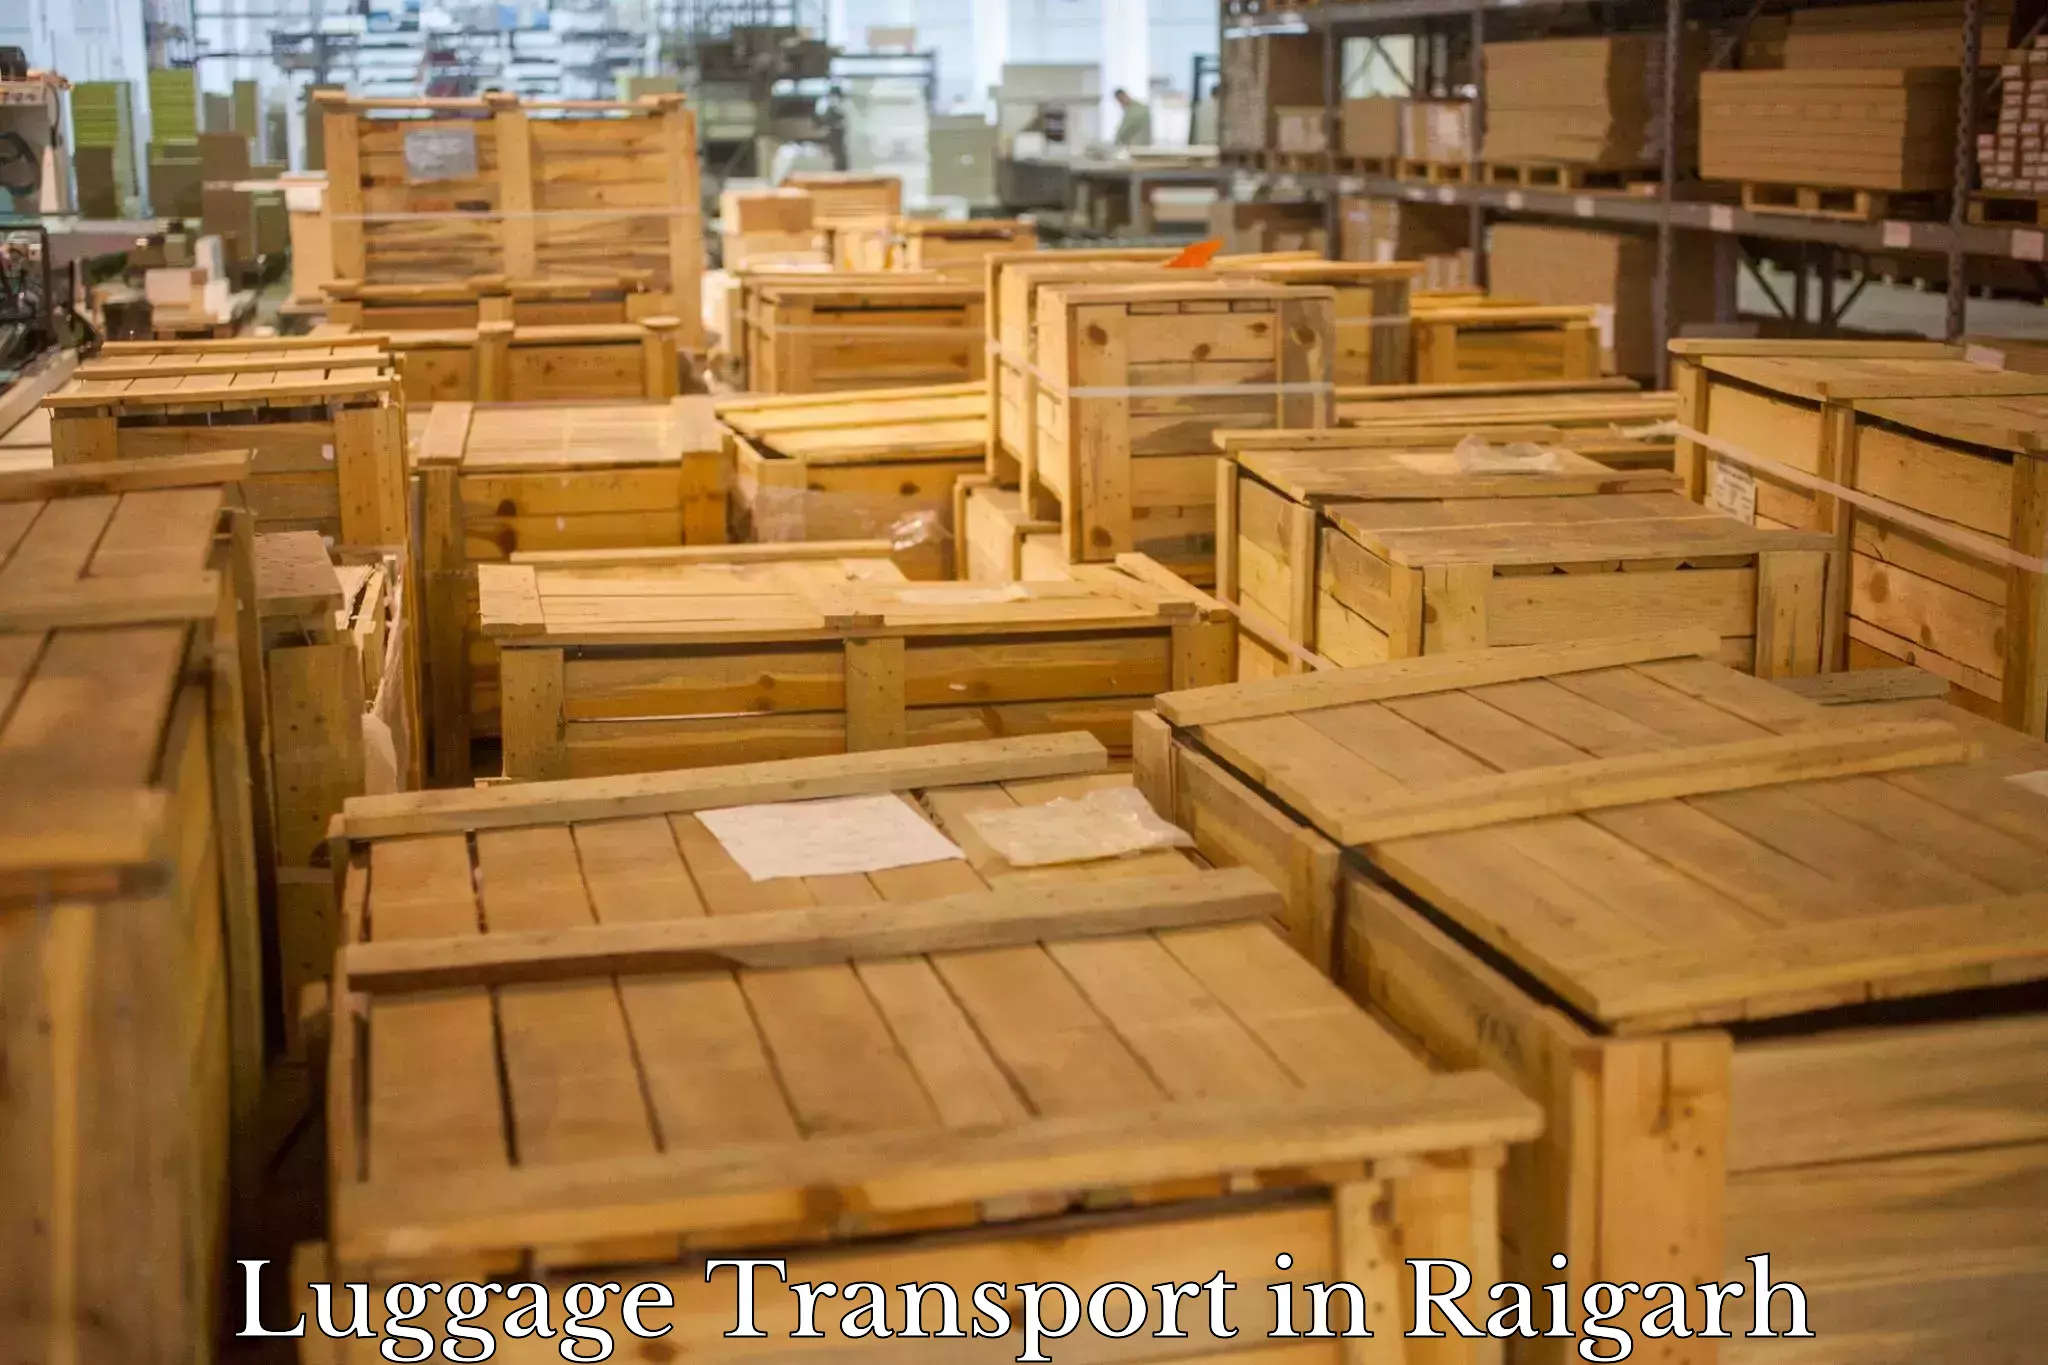 Baggage transport management in Raigarh